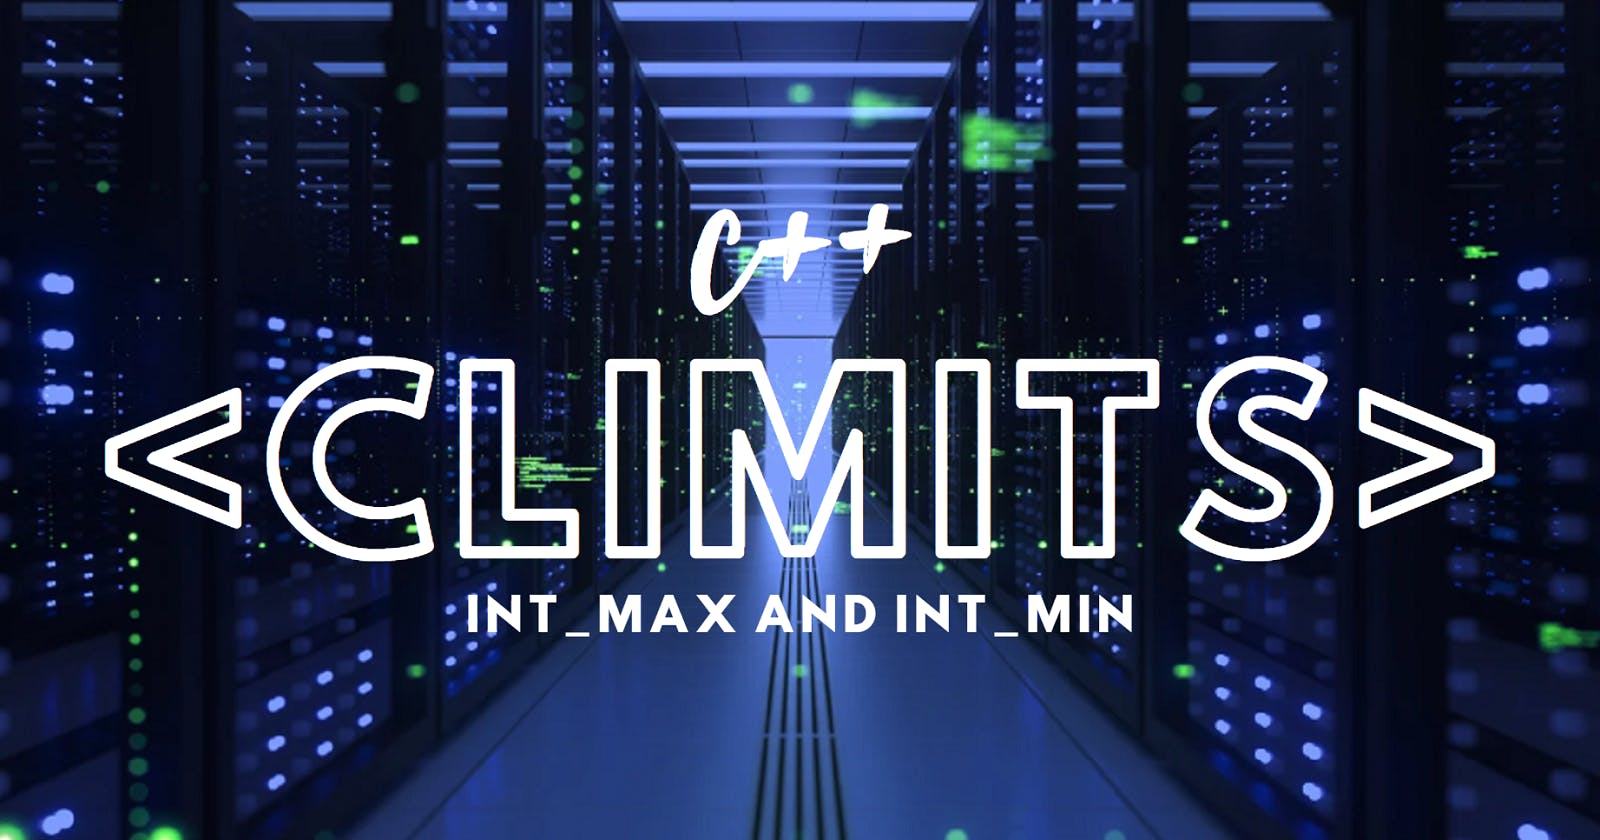 INT_MAX and INT_MIN in C++